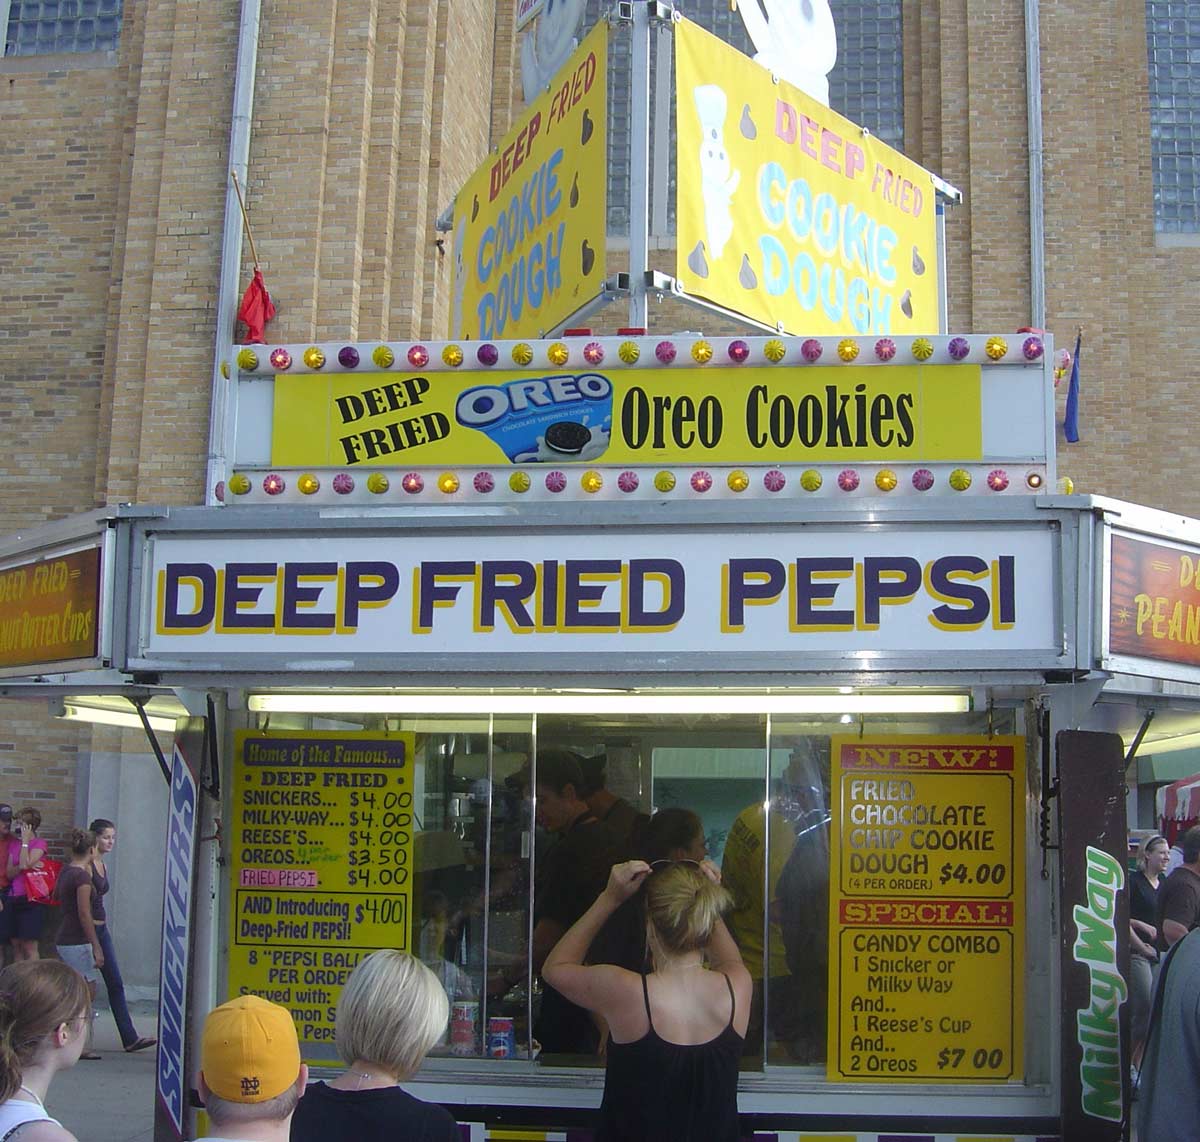 awesome pics and memes - fair - Deep Fried Nut Butter Curs Kebis Oreo Cookies Deep Fried Pepsi Home of the Famous... Deep Fried. Snickers... $4.00 MilkyWay... $4.00 Reese'S... $4.00 Oreos. $3.50 Fried Pepsi. $4.00 Deep Fried Oreo Chocolate Sandwic And Int